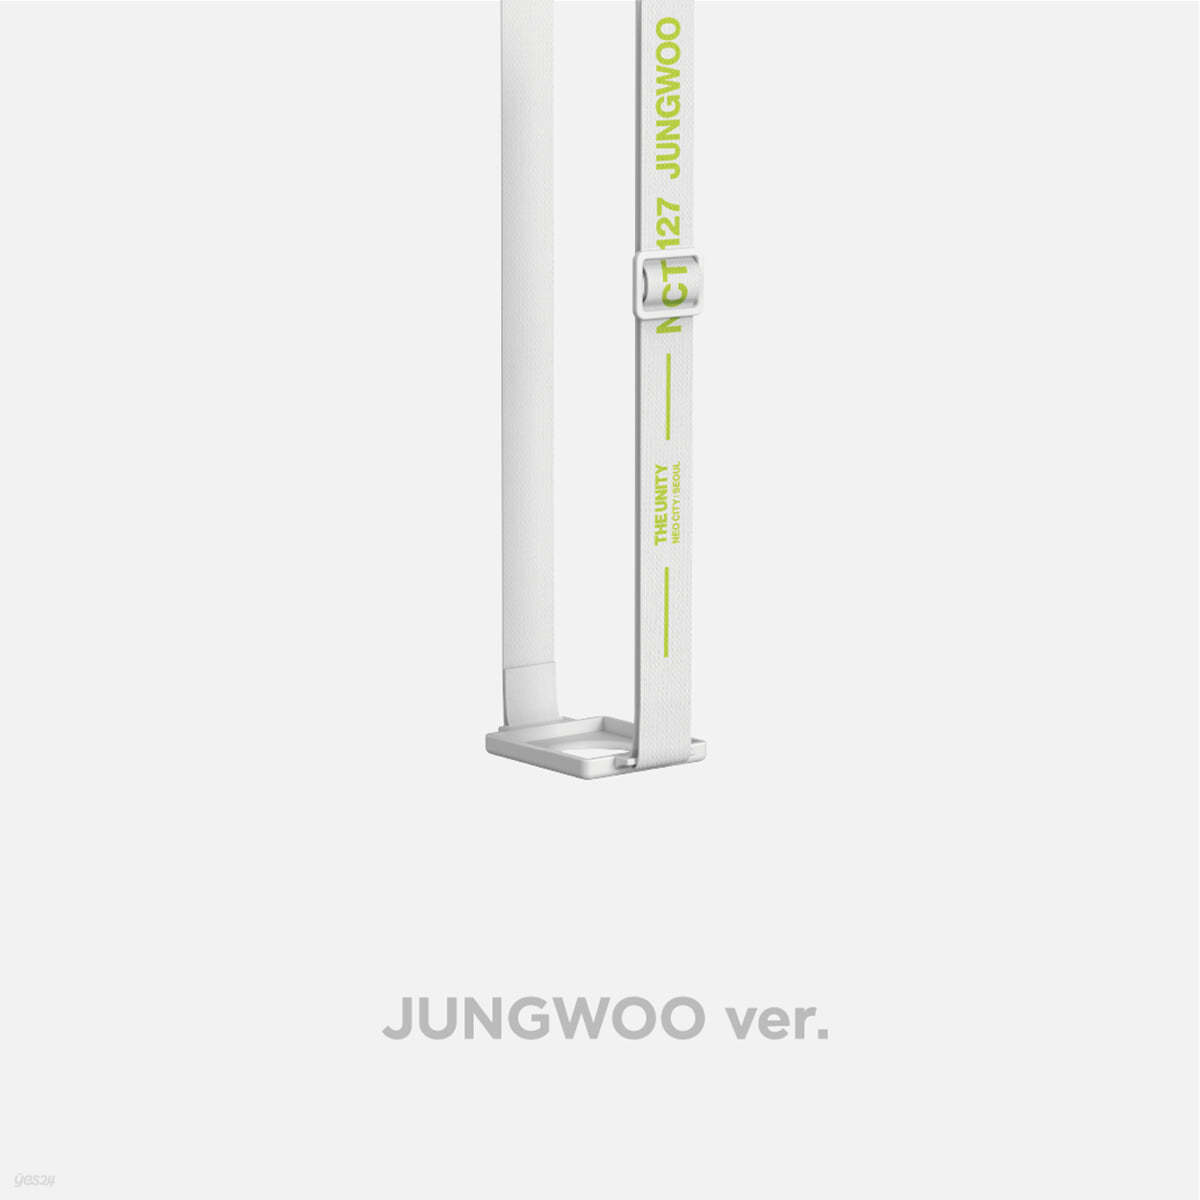 [NCT 127 3RD CONCERT 'THE UNITY'] OFFICIAL FANLIGHT STRAP SET [정우 ver.]